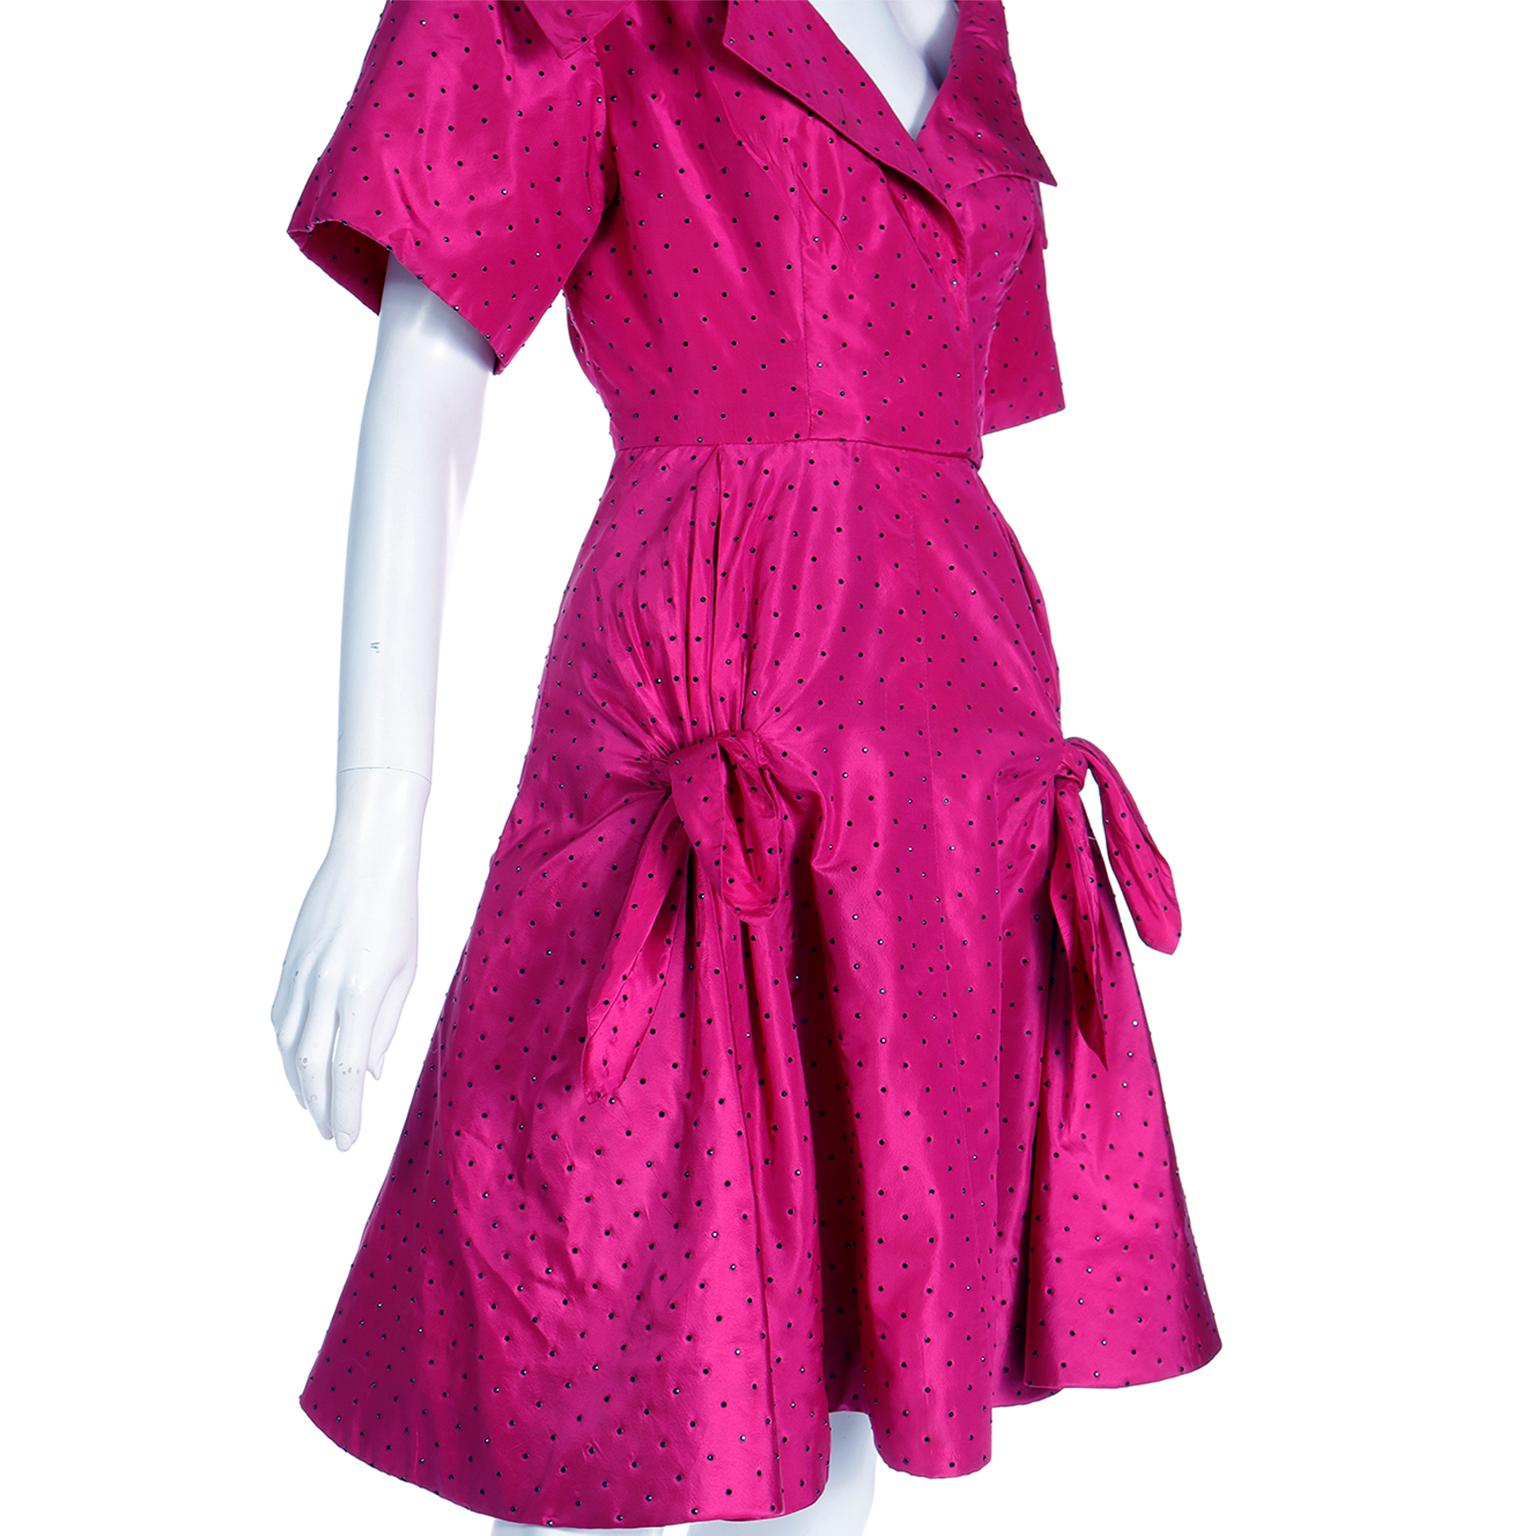 Christian Dior Couture 1987 Magenta Evening Dress w Crystals by Marc Bohan For Sale 13